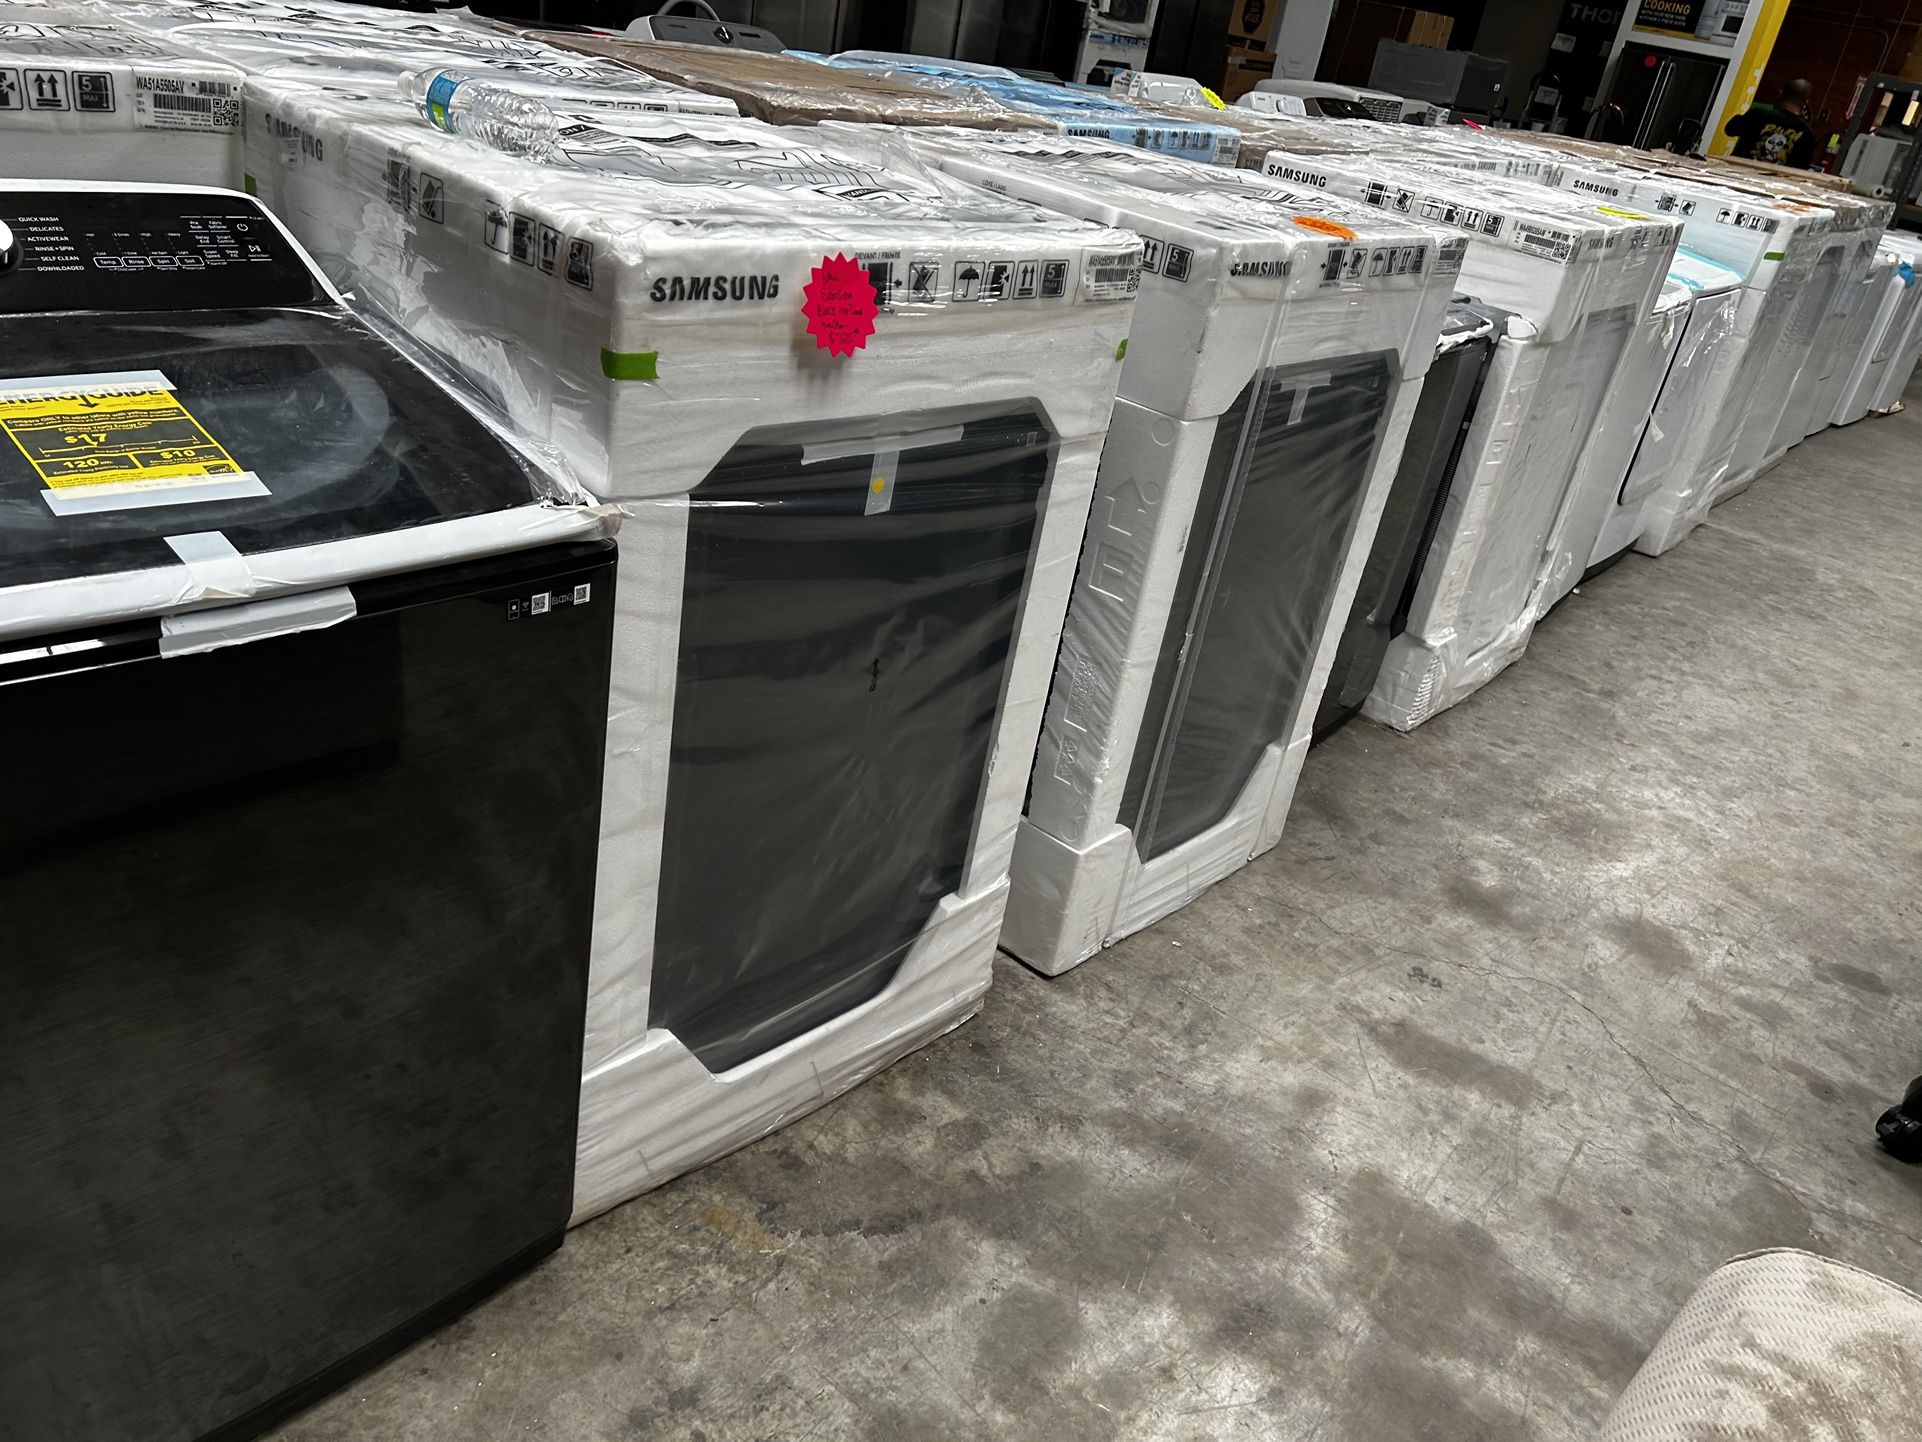 New In The Box Washer And Dryer Sets! Financing Available!